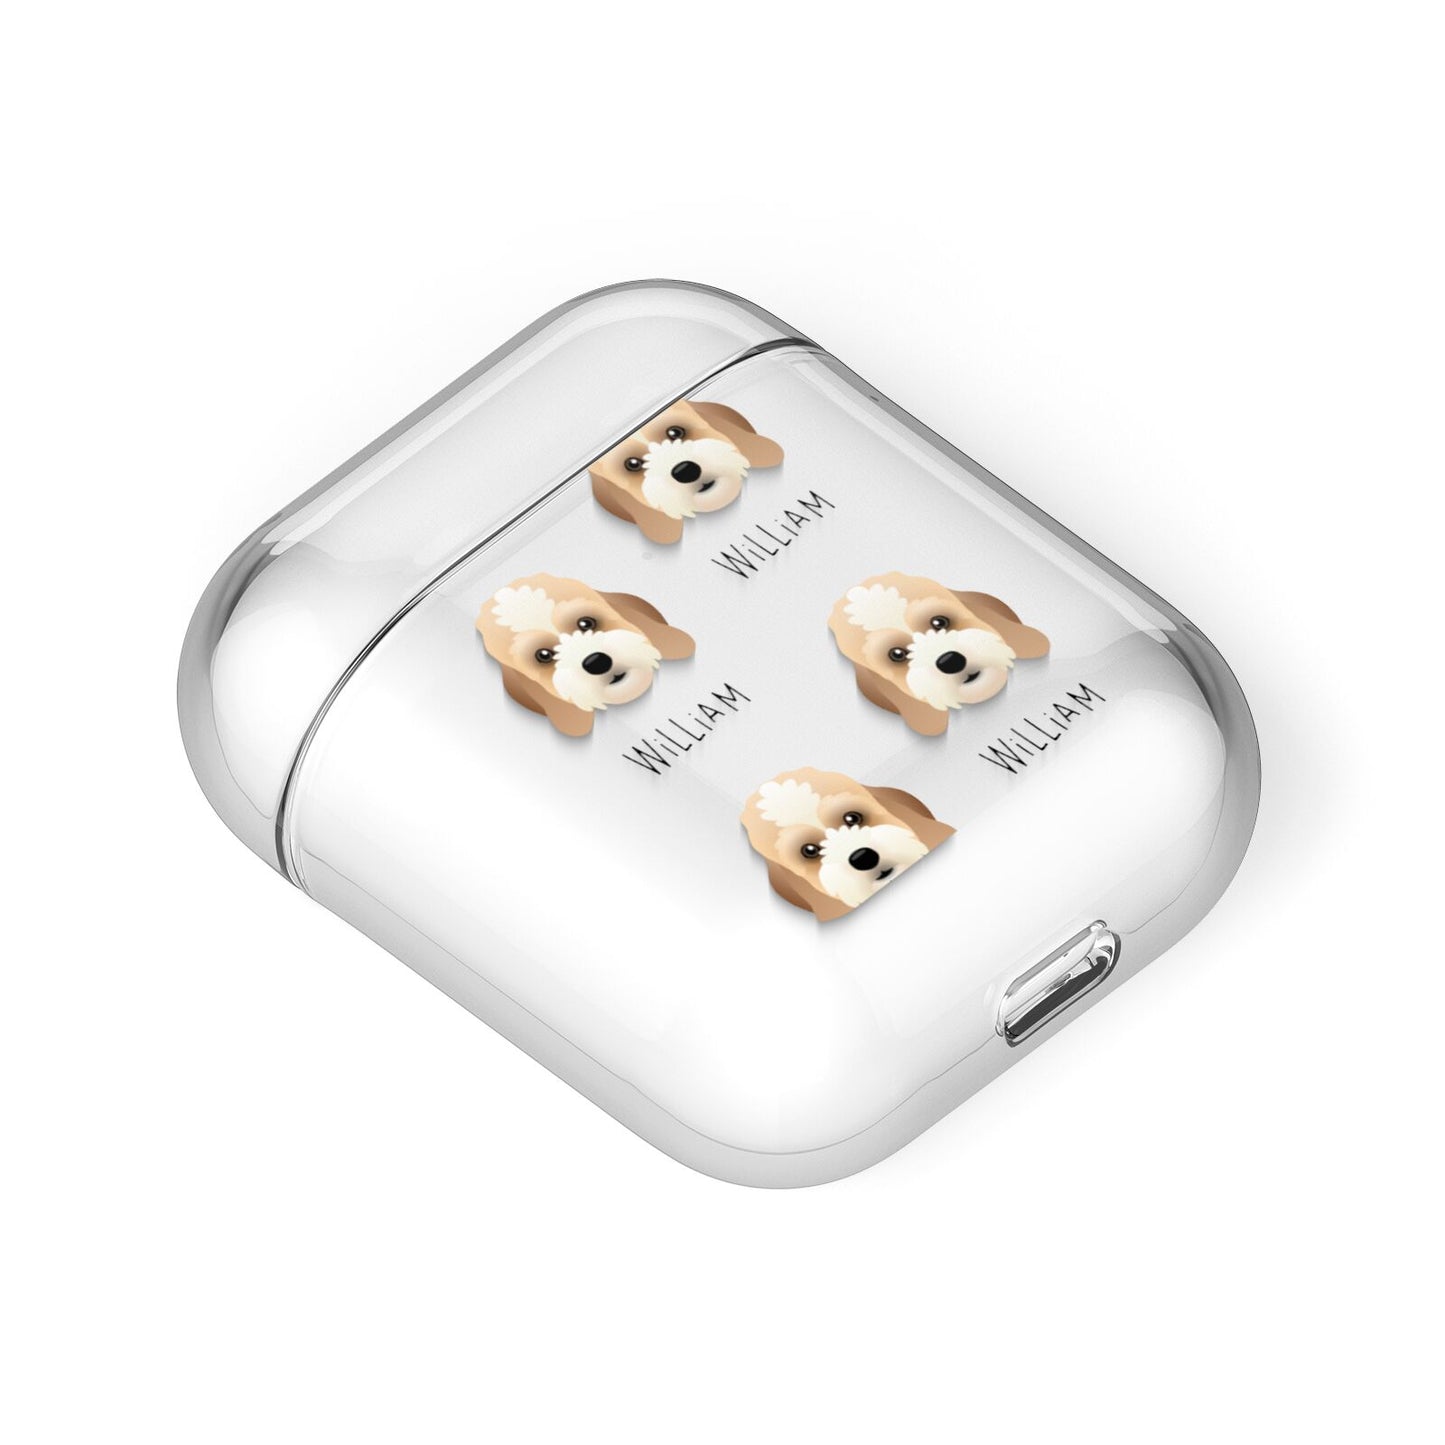 Lhasapoo Icon with Name AirPods Case Laid Flat